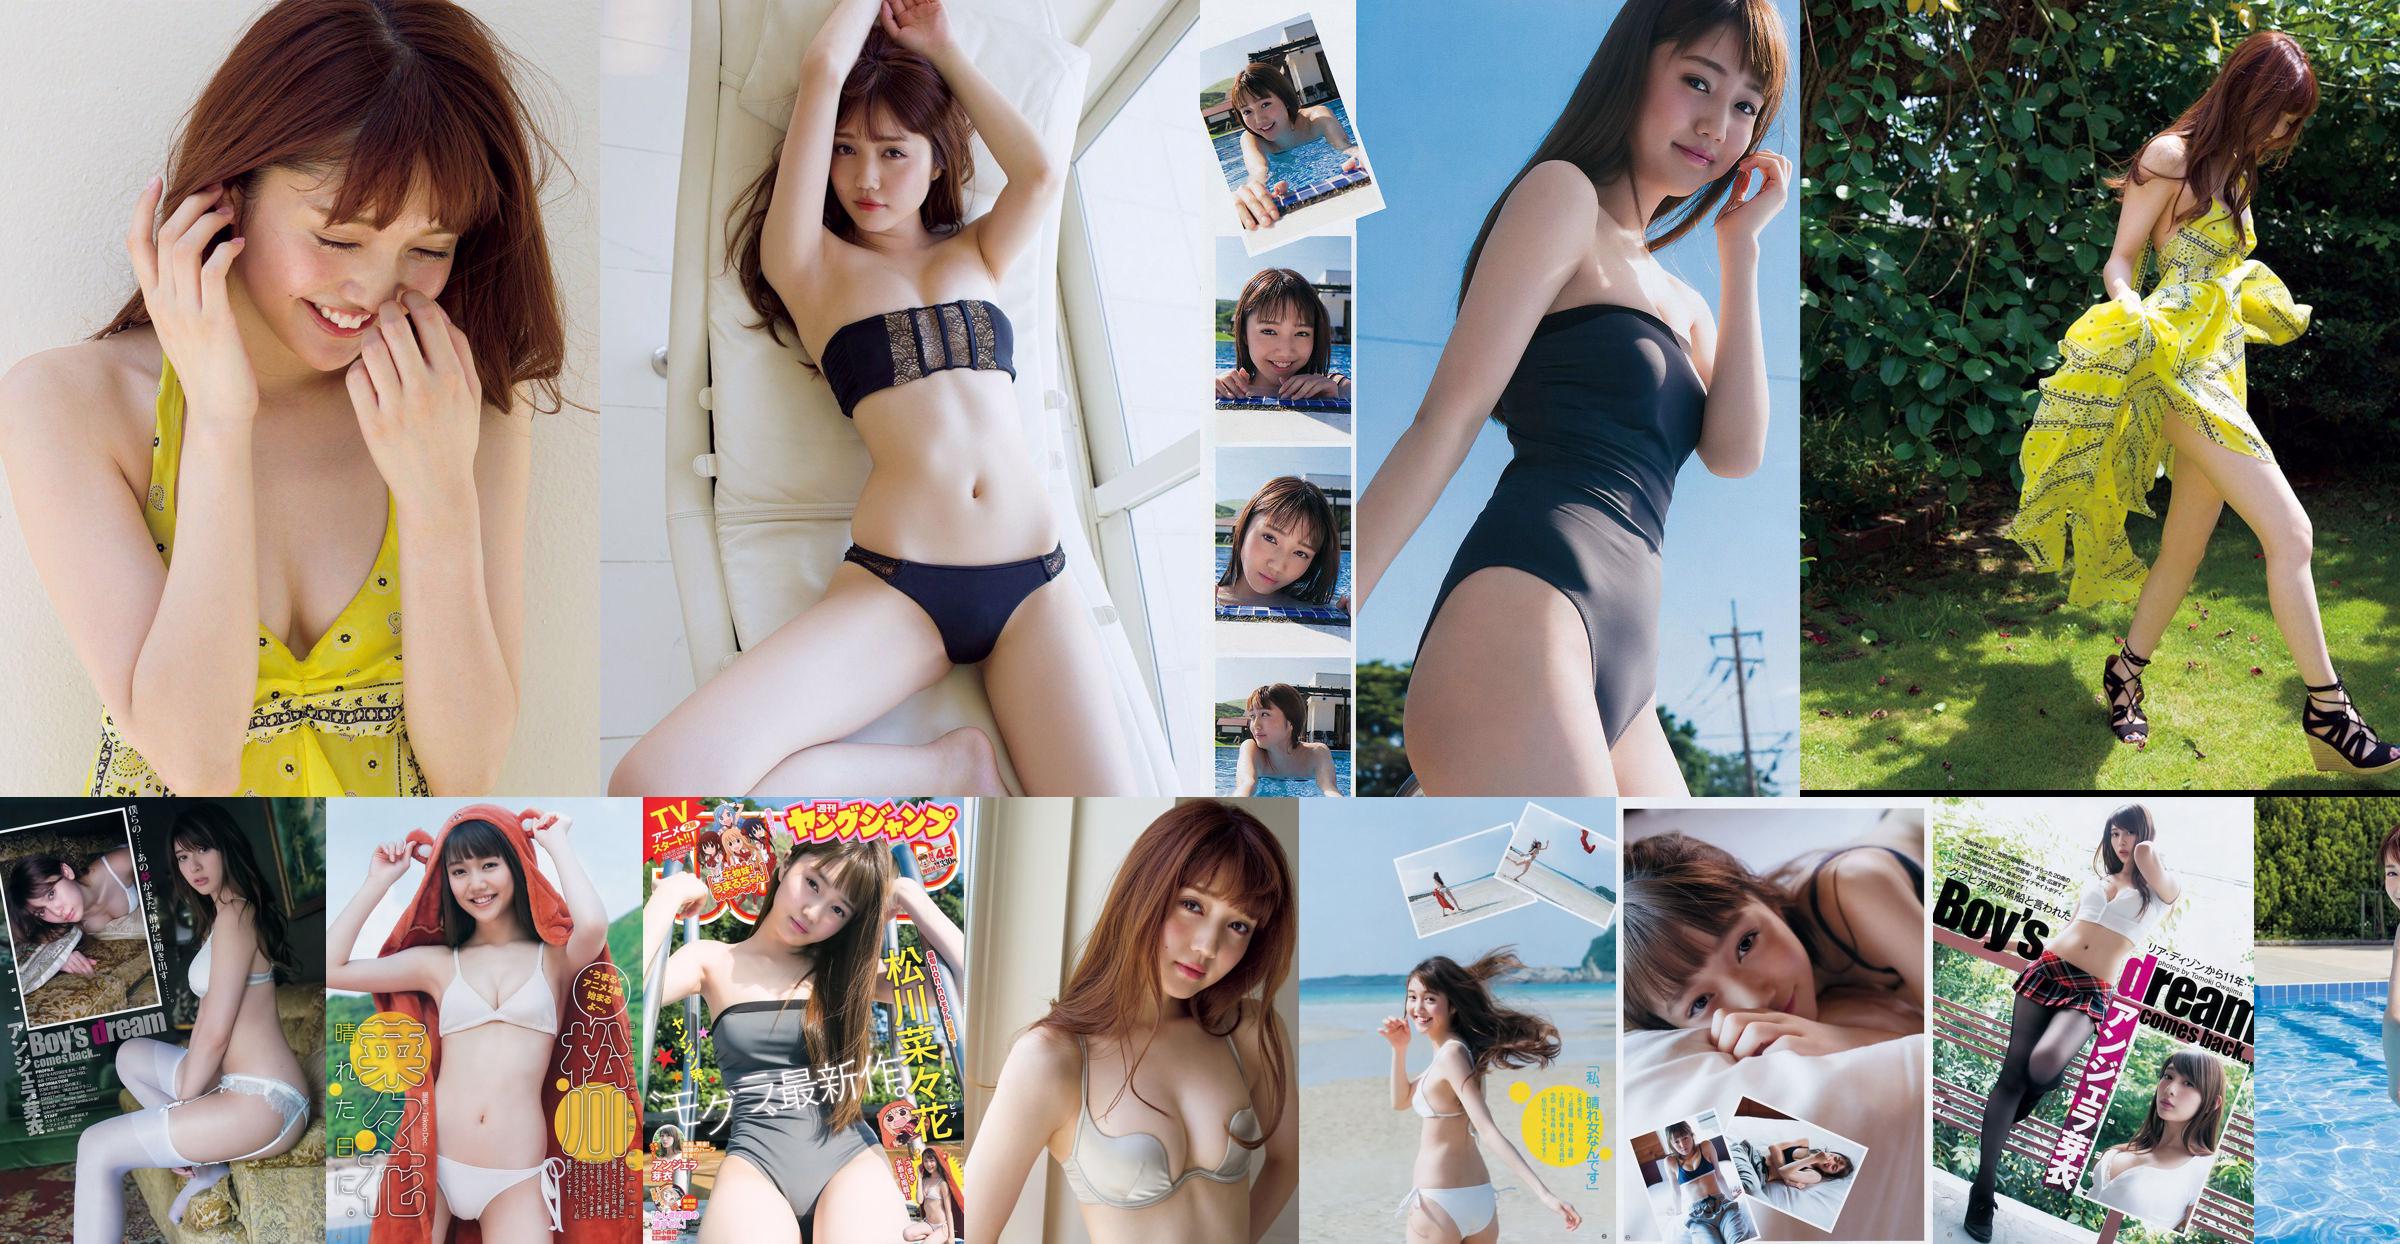 [FRIDAY] Nanaka Matsukawa << Popular model and swimsuit date awesome 20-year-old sex appeal (with video) >> Photo No.df3330 Page 1